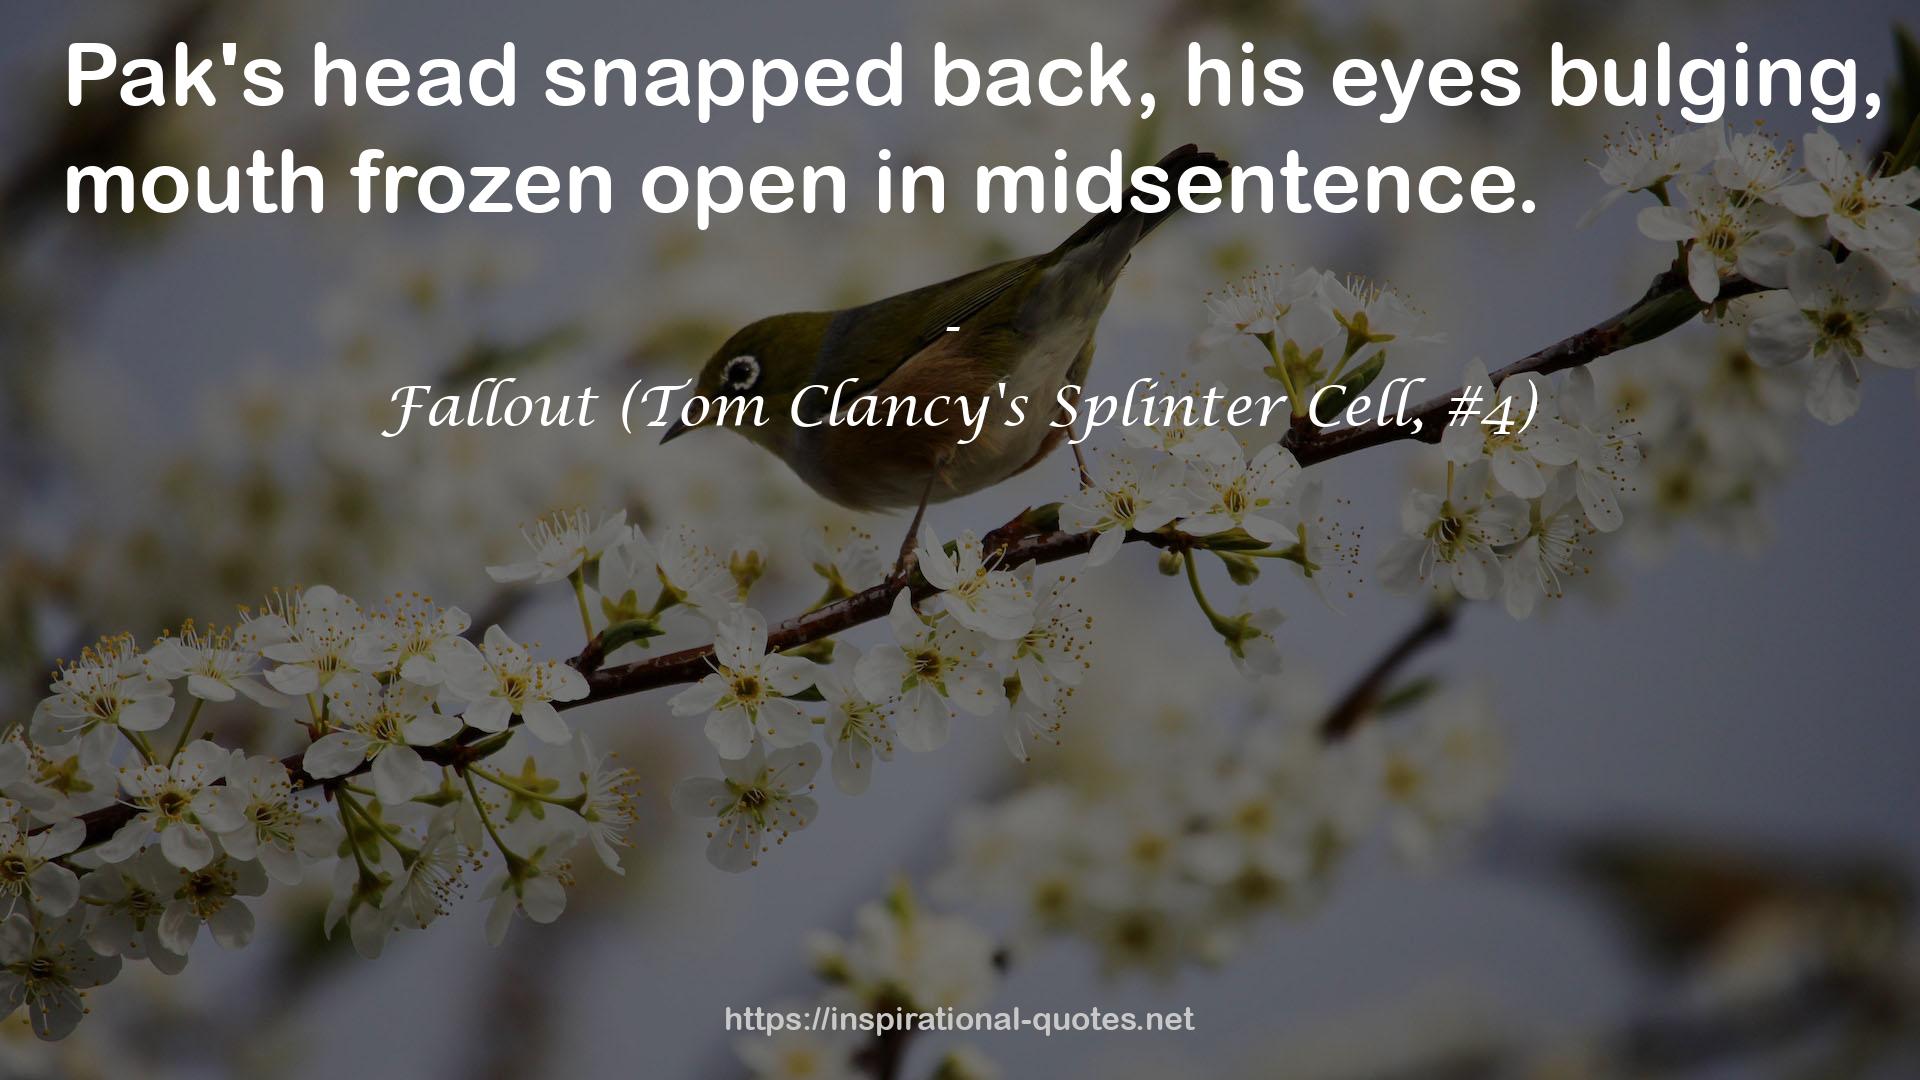 Fallout (Tom Clancy's Splinter Cell, #4) QUOTES